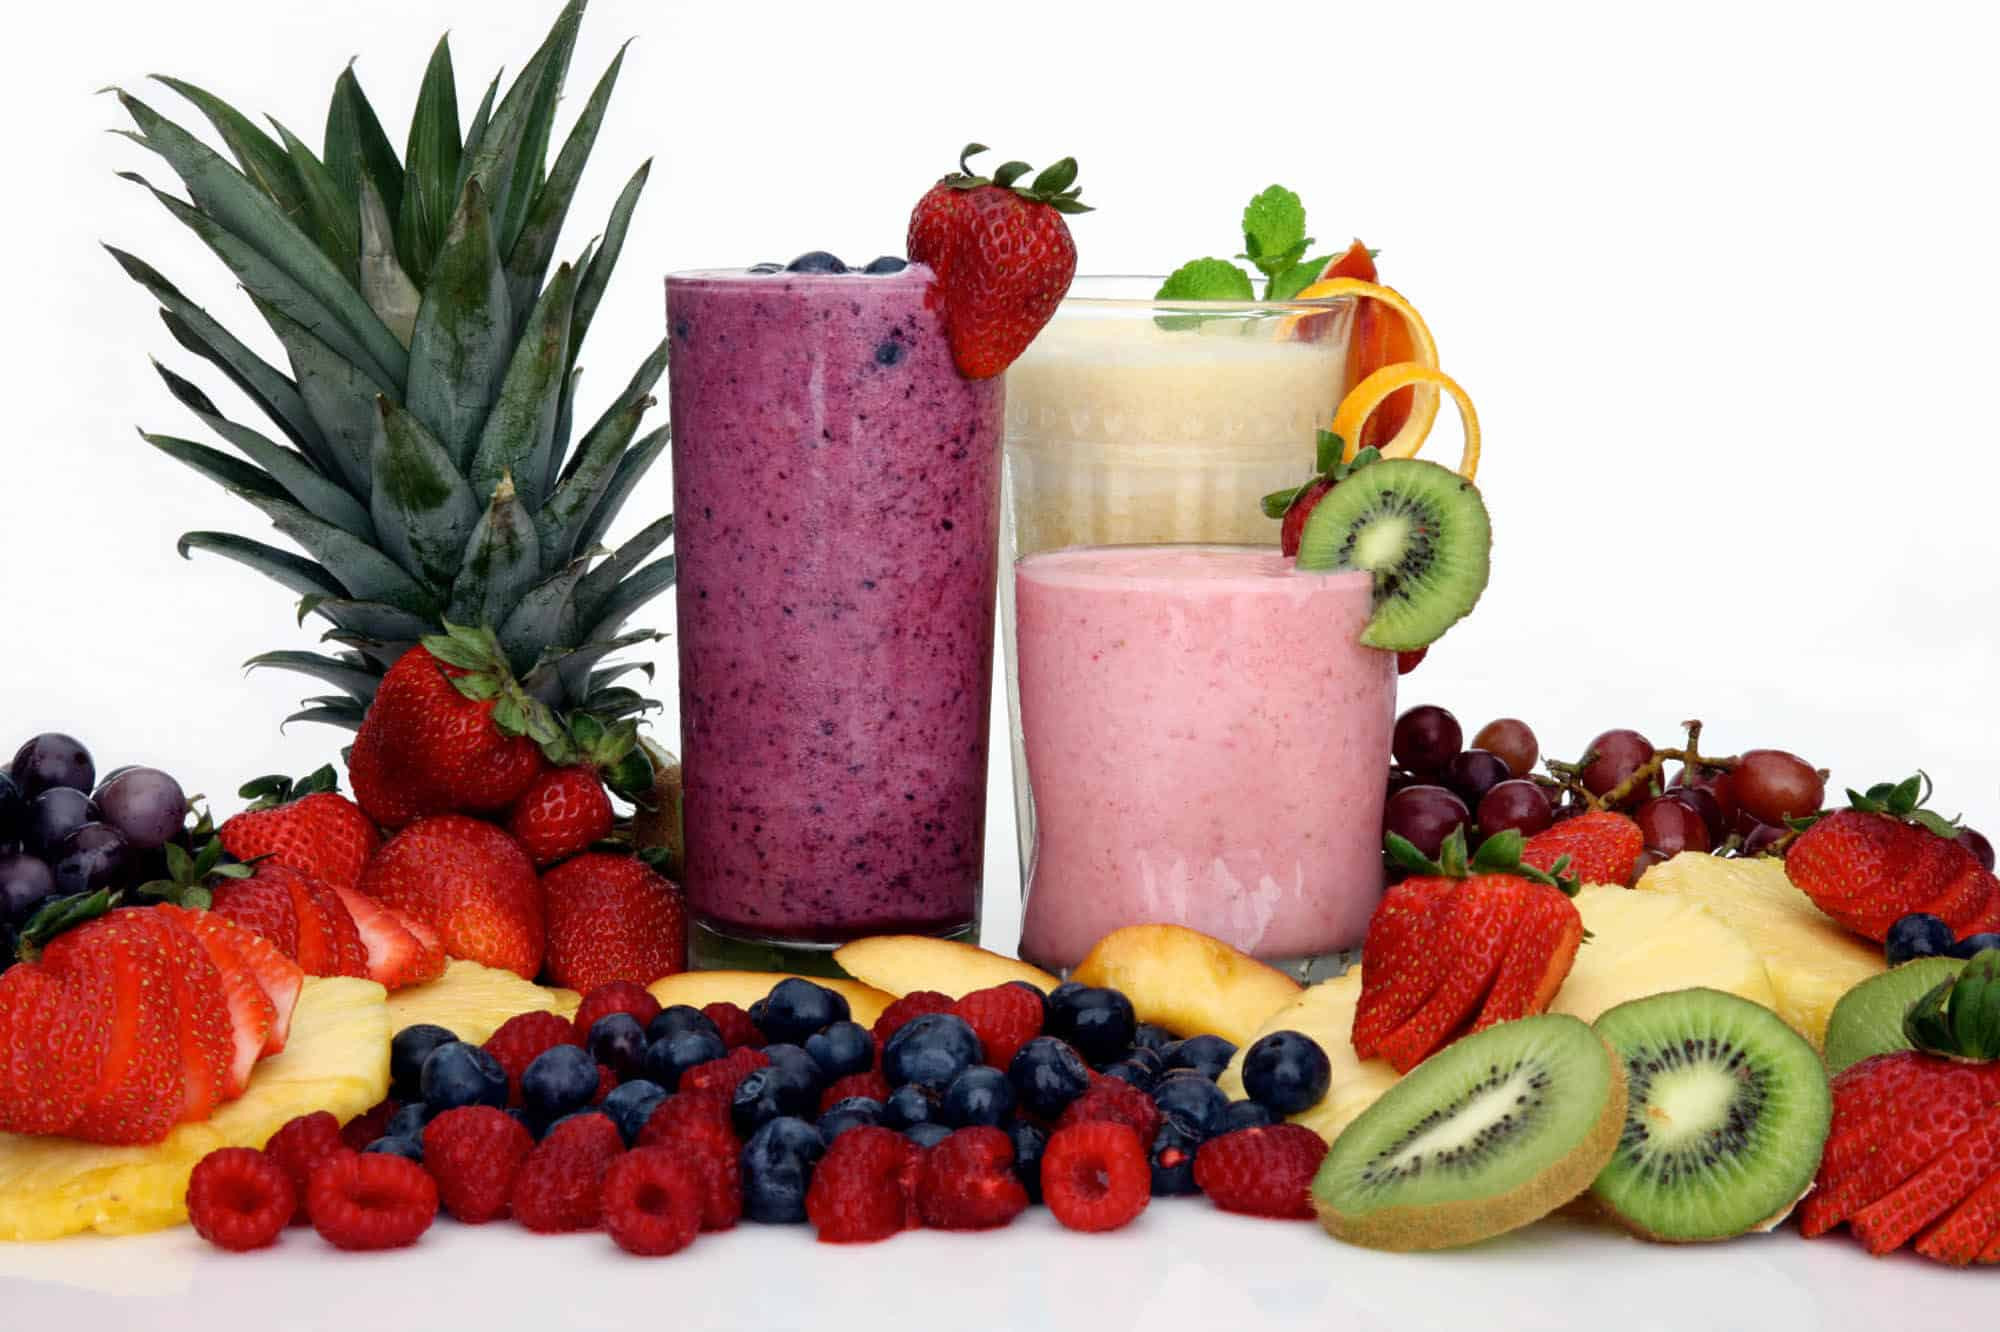 Fruit And Vegetable Smoothie Recipes
 The Smoothie Guide — Gentleman s Gazette